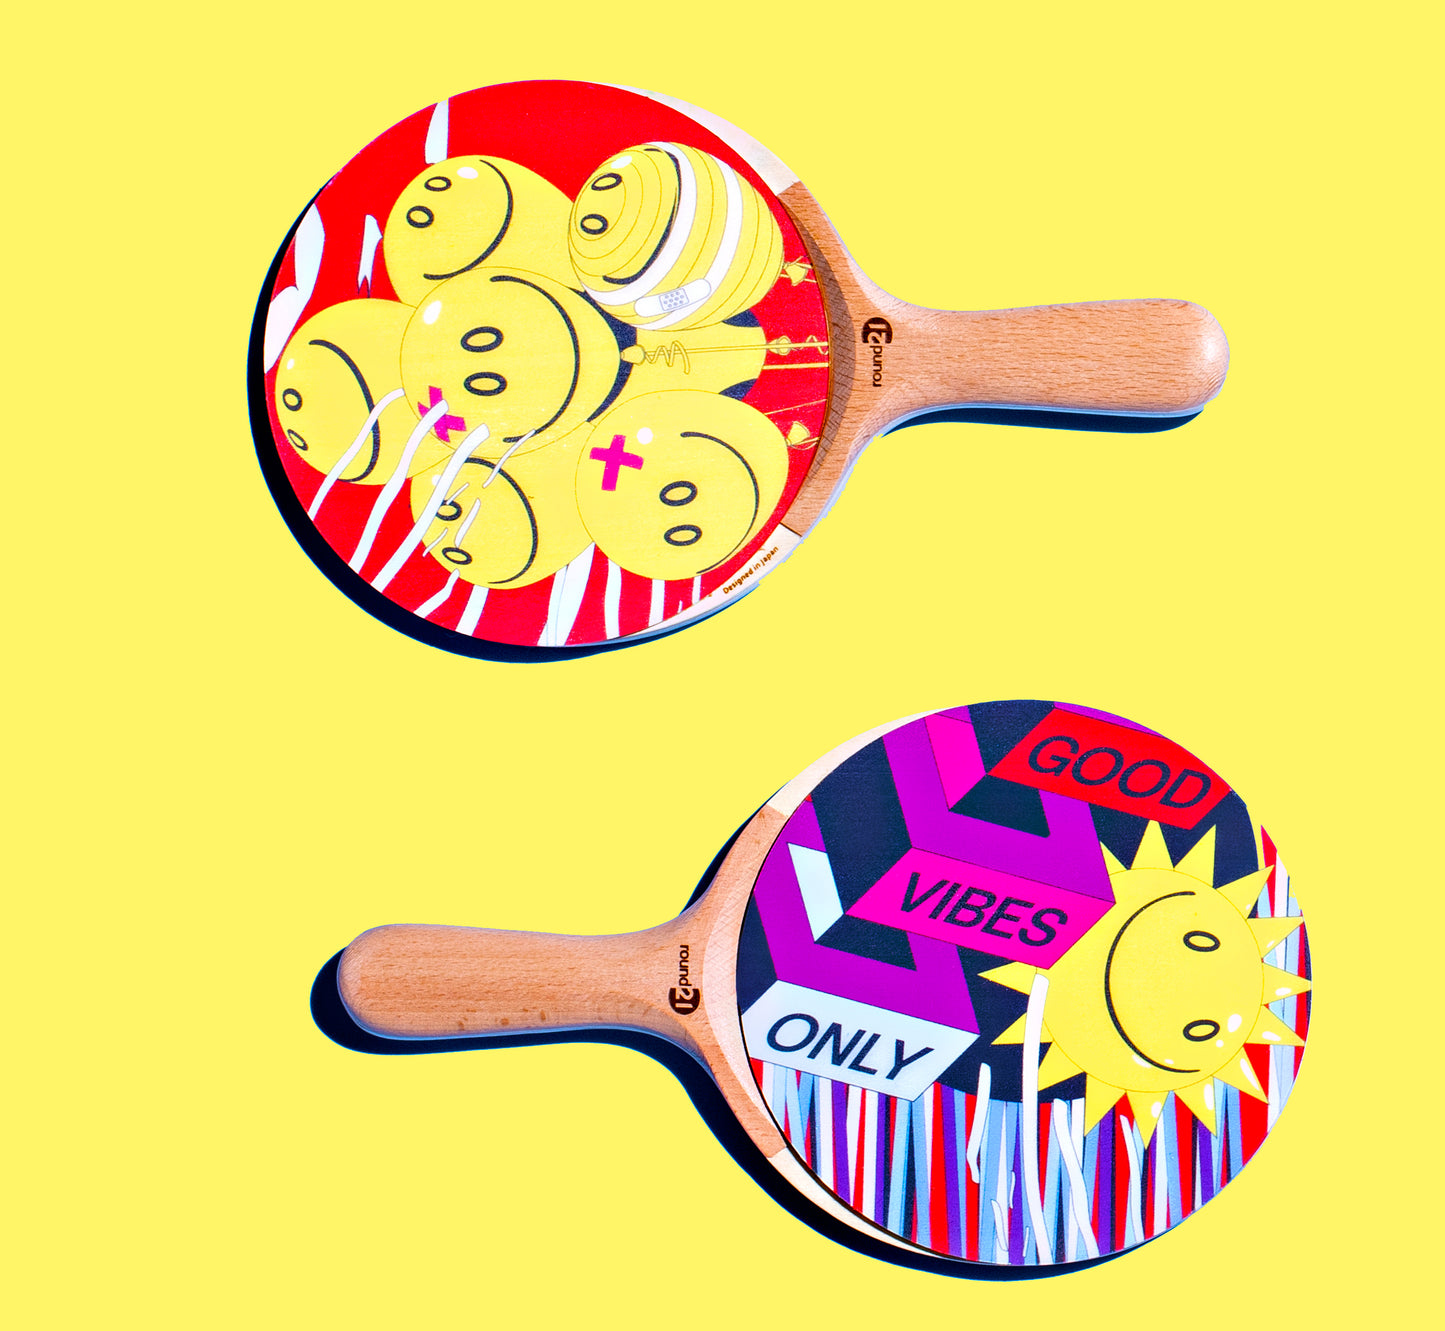 Ping Pong Challenge Game – Doxa Products